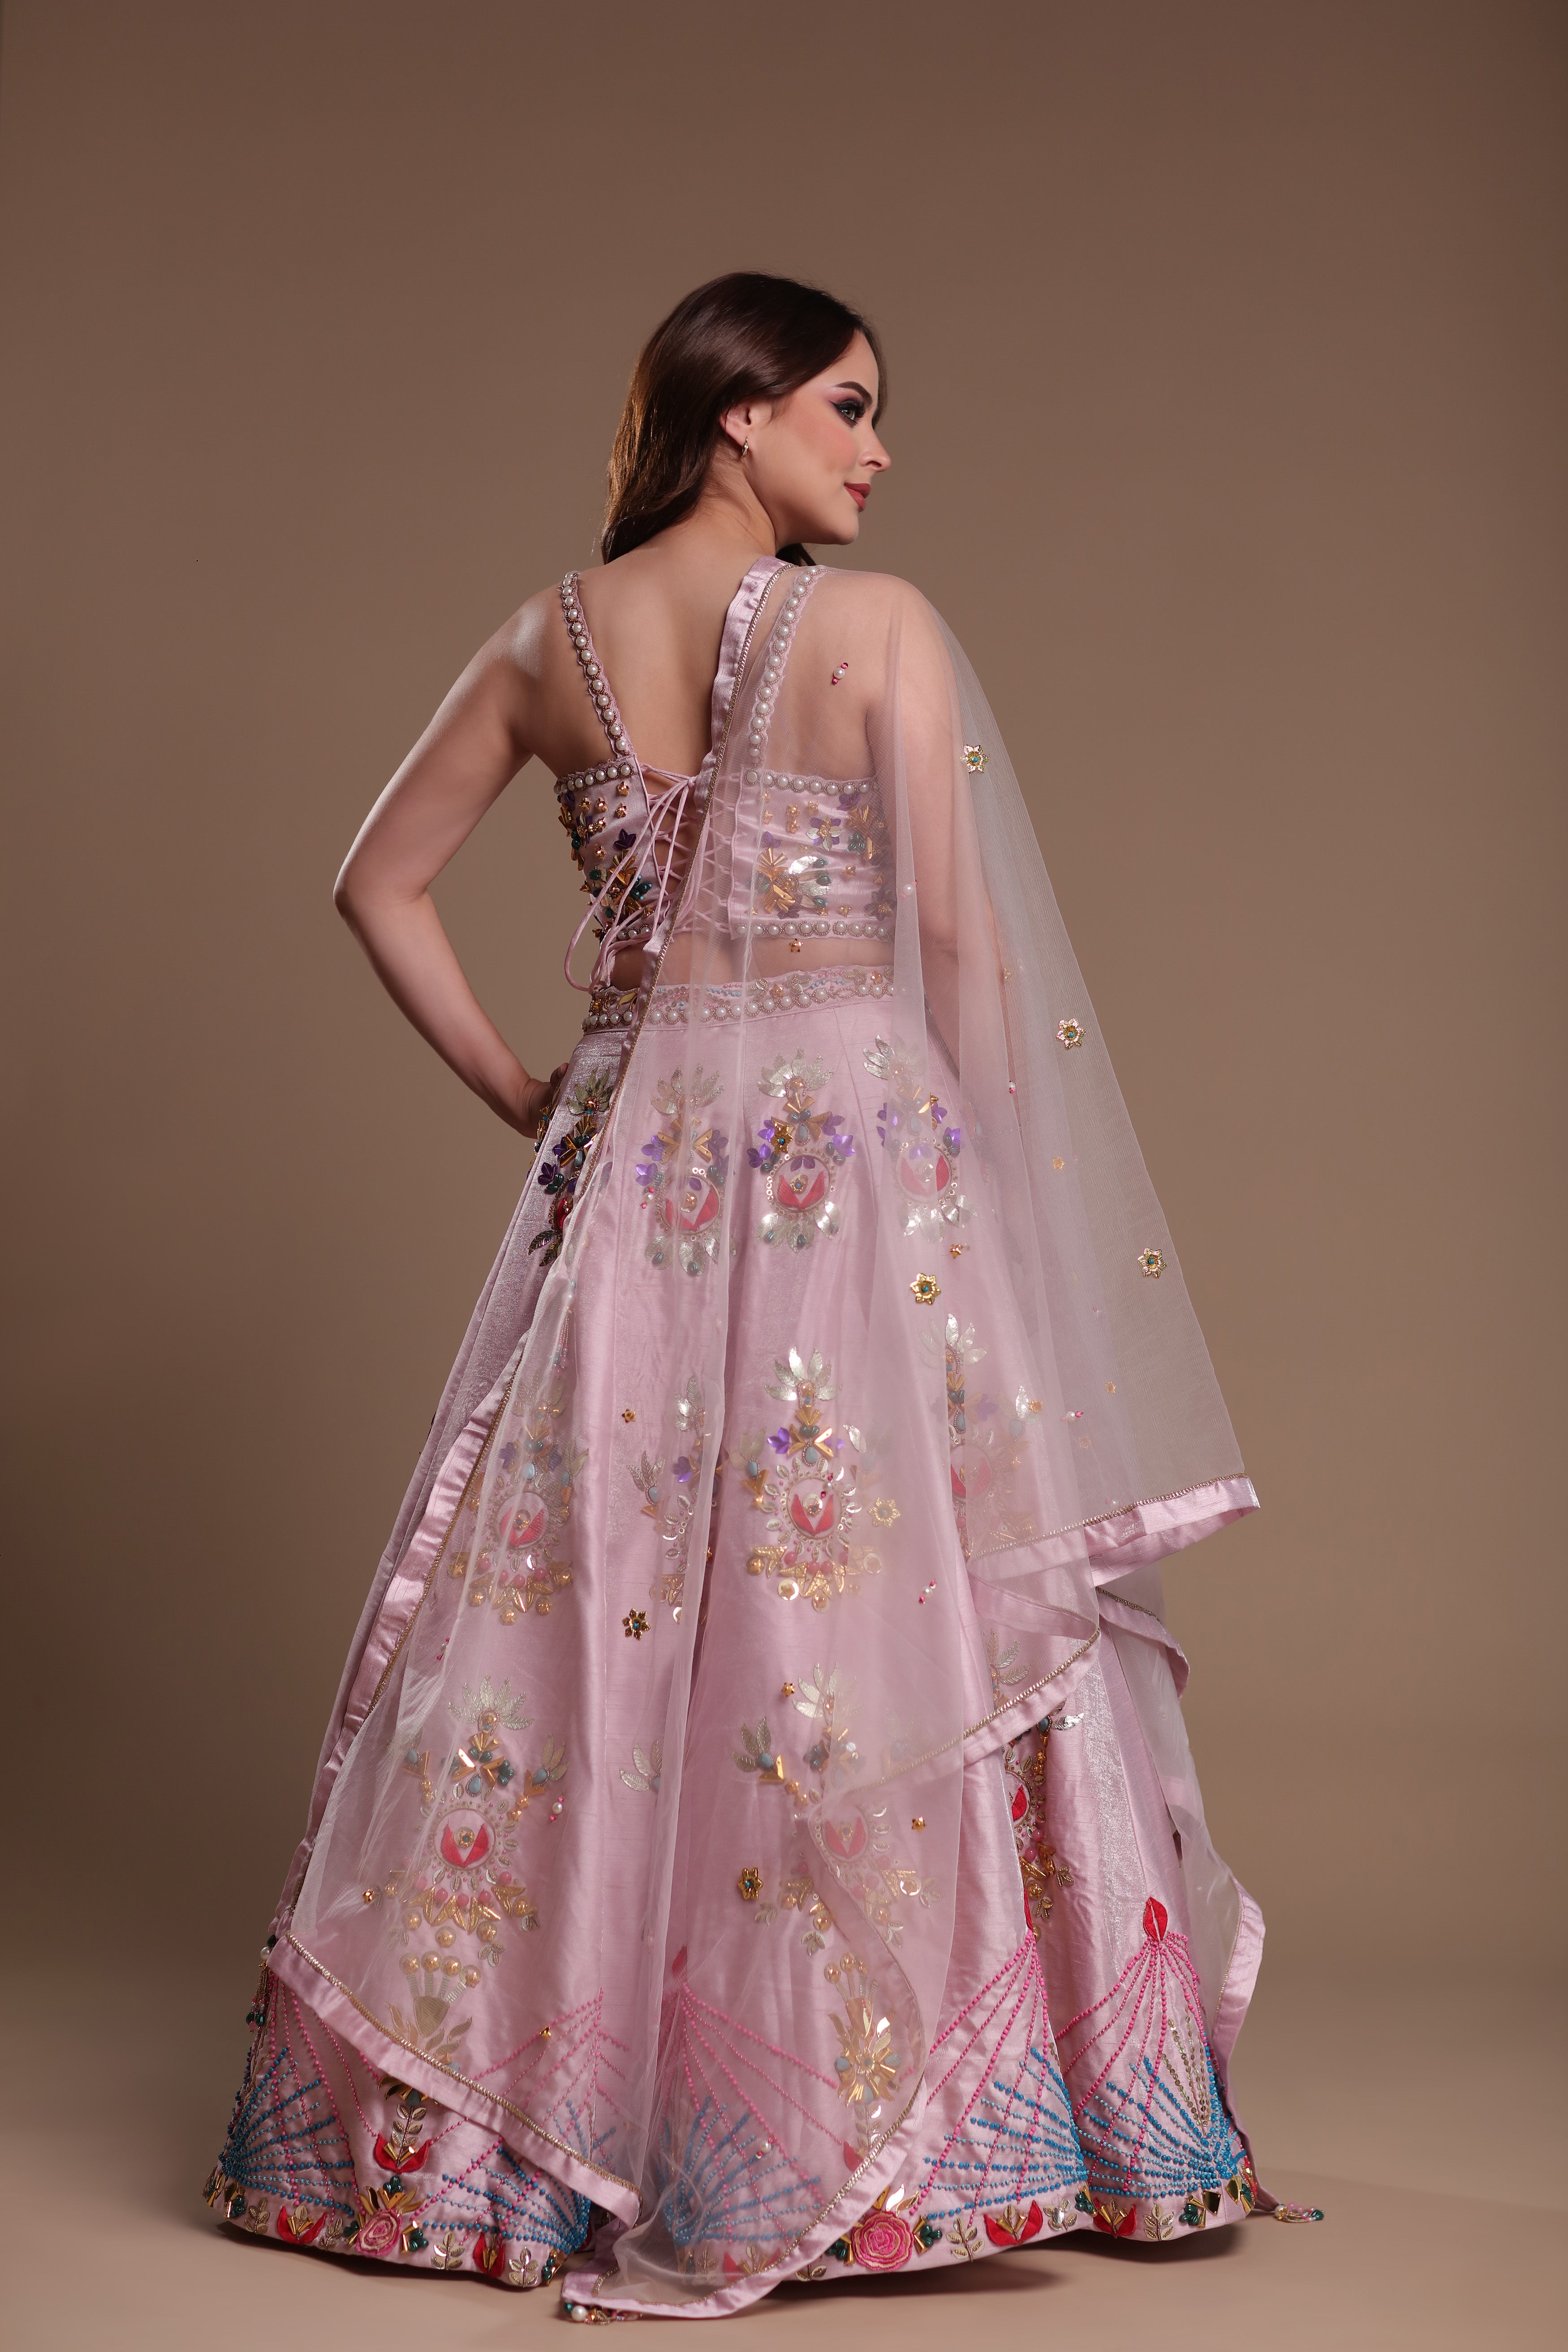 Pastel Rose Ensemble Featuring Embroidered Lehenga And Blouse